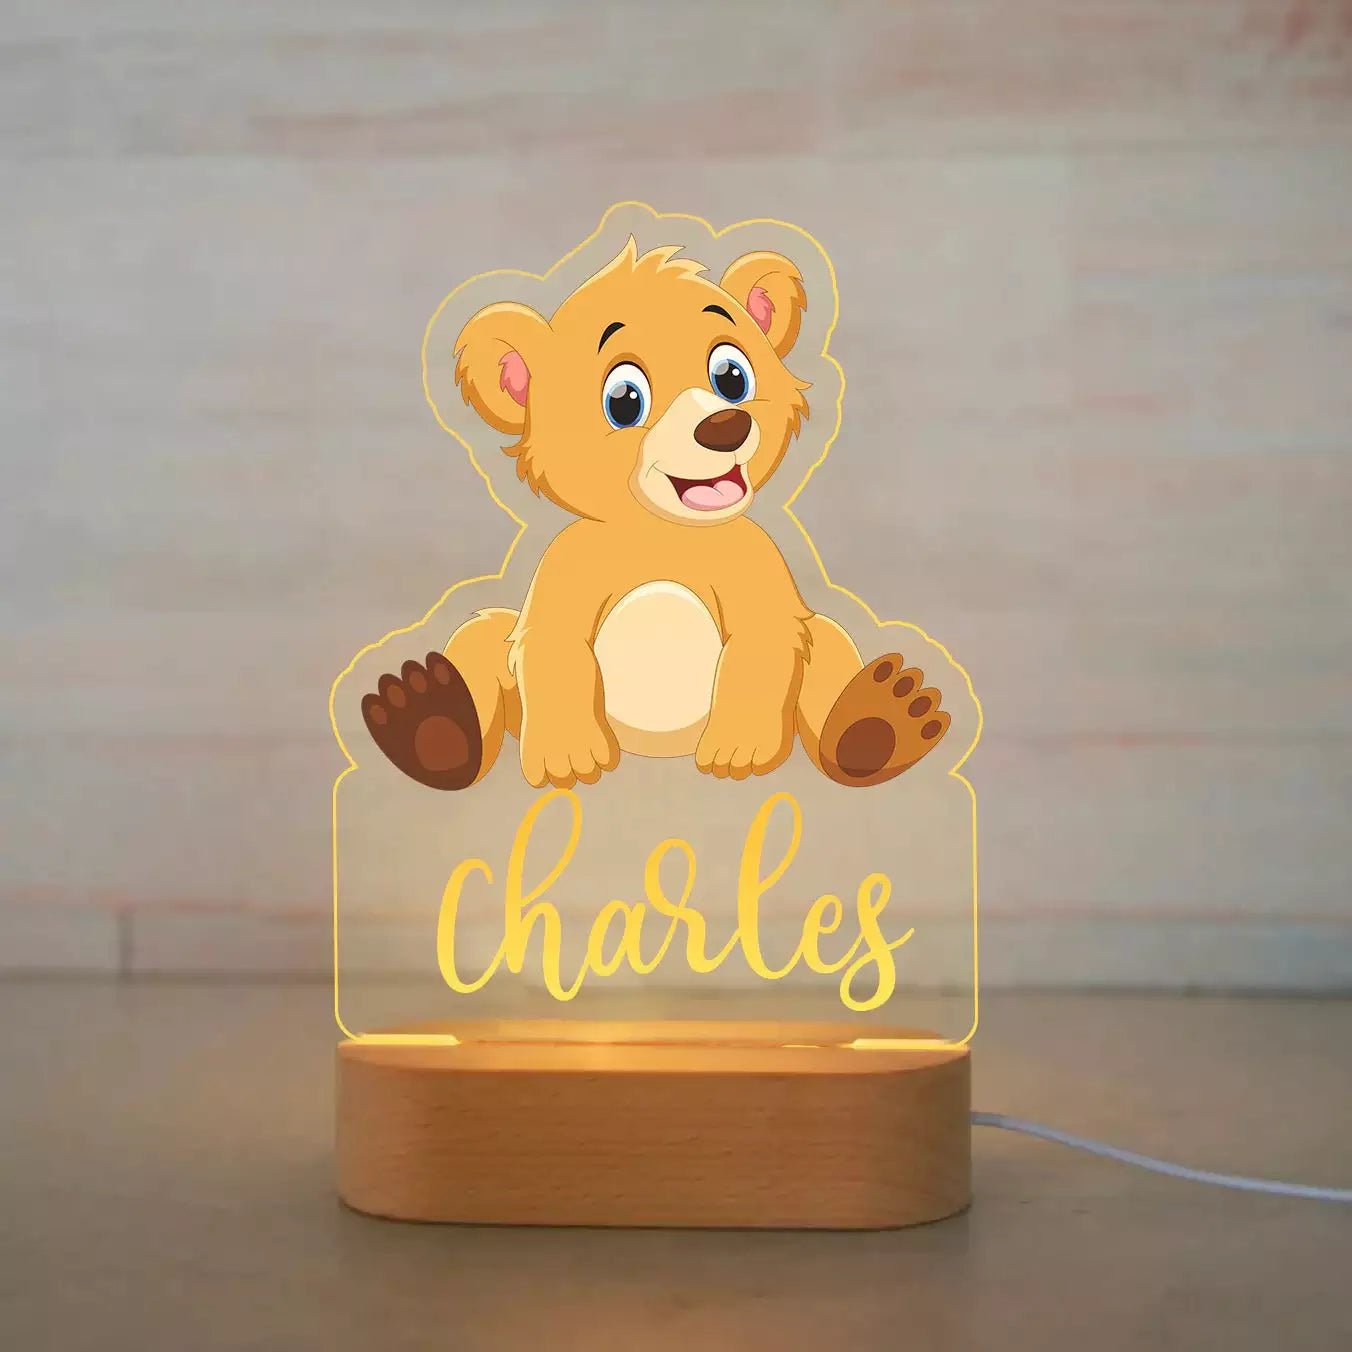 Customized Animal-themed Night Light for Kids - Personalized with Child's Name, Acrylic Lamp for Bedroom Decor Warm Light / 10Bear